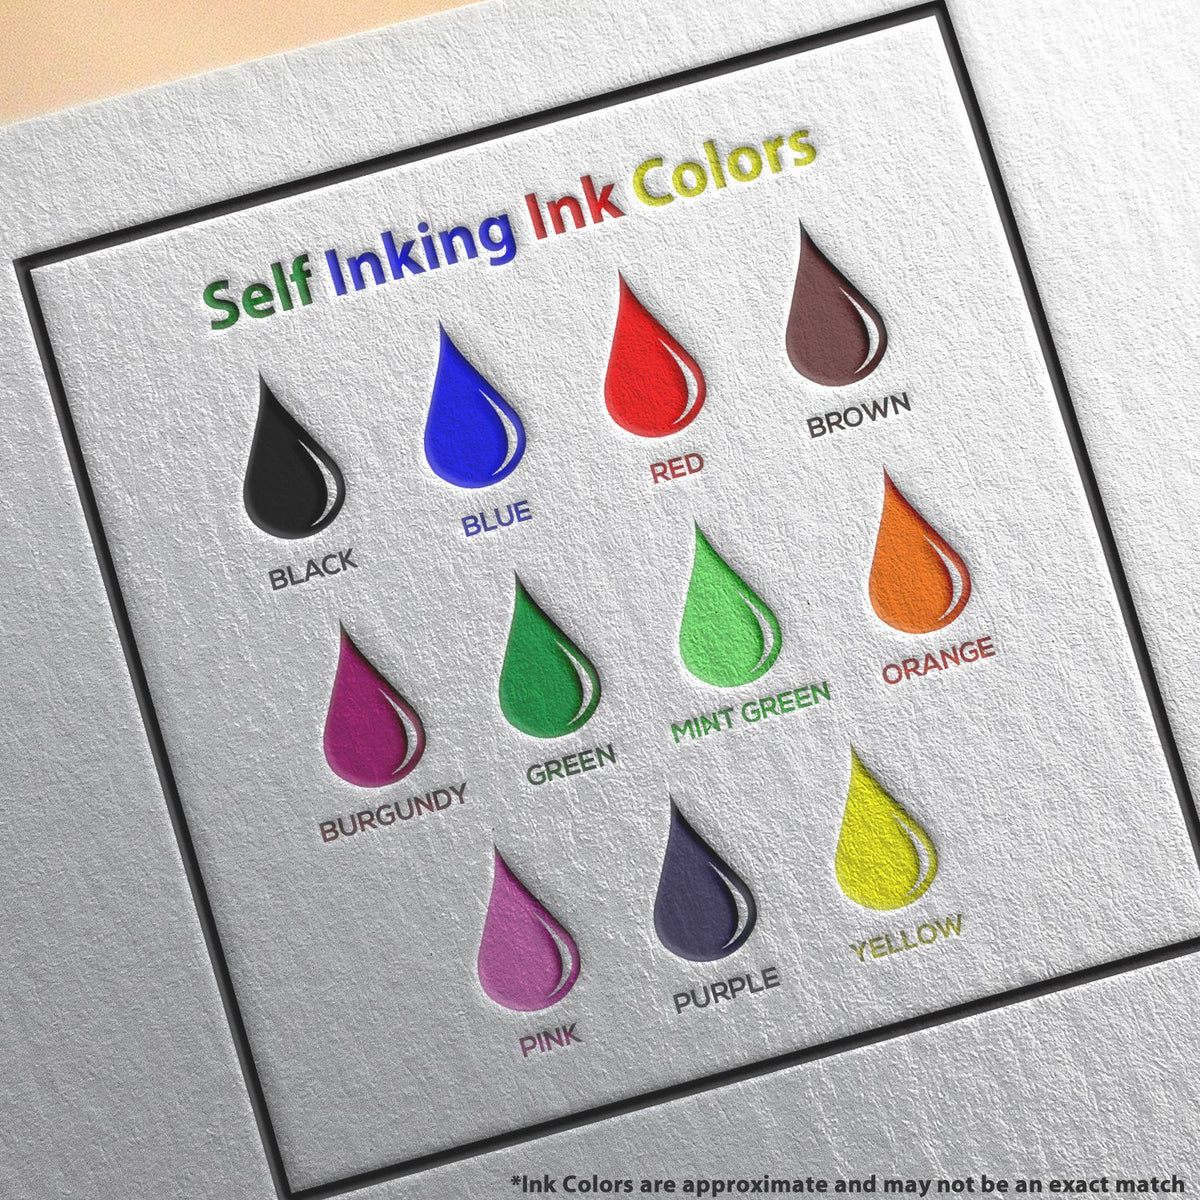 A picture showing the different ink colors or hues available for the Self-Inking Utah Geologist Stamp